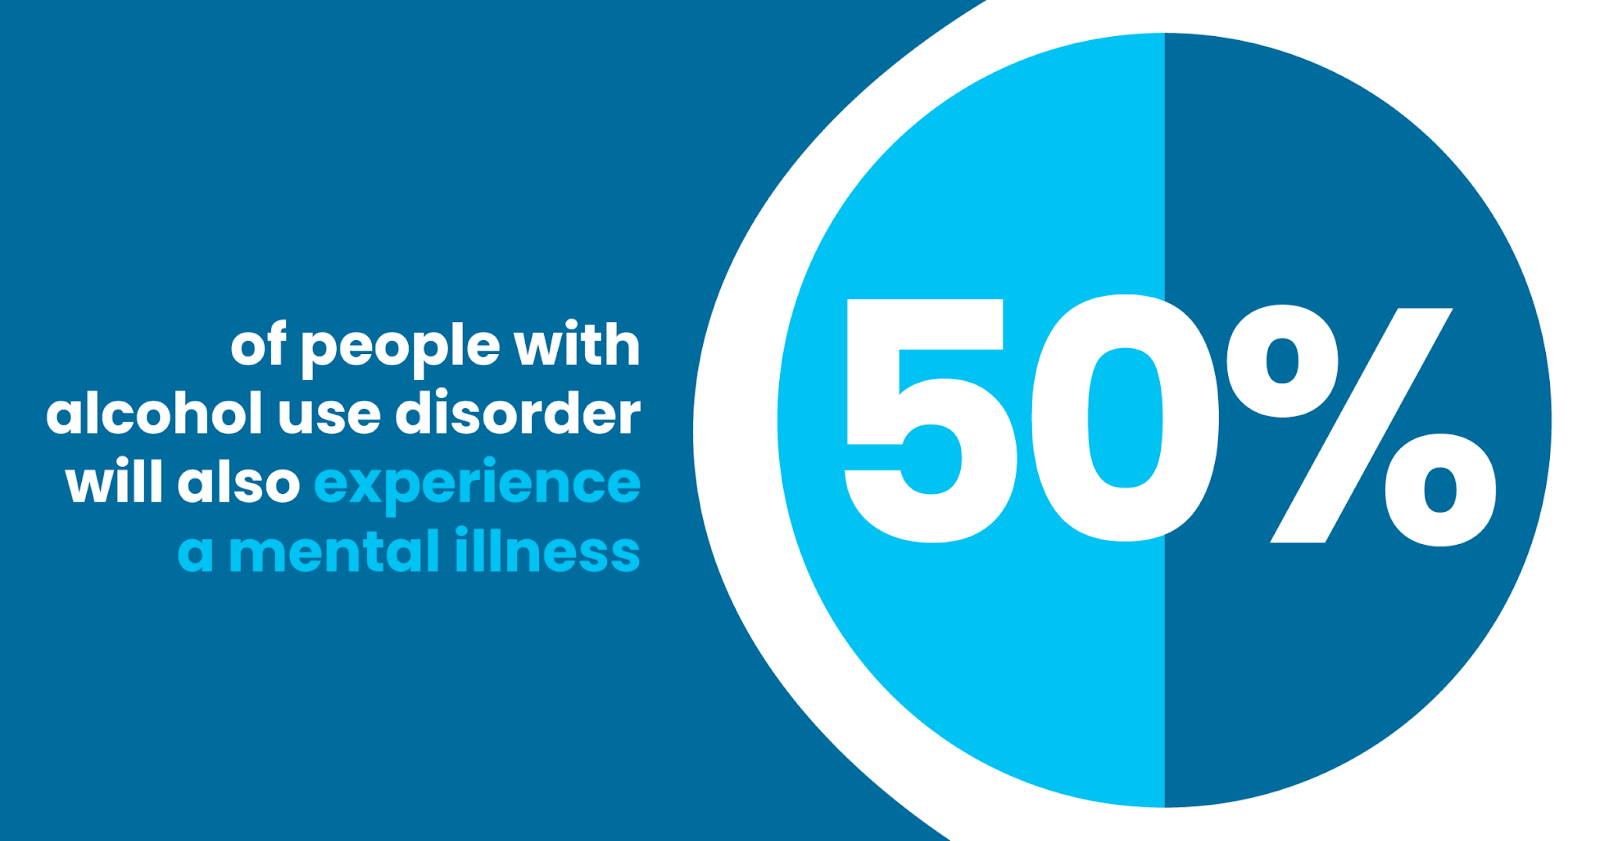 50% of people with alcohol use disorder will also experience a mental illness